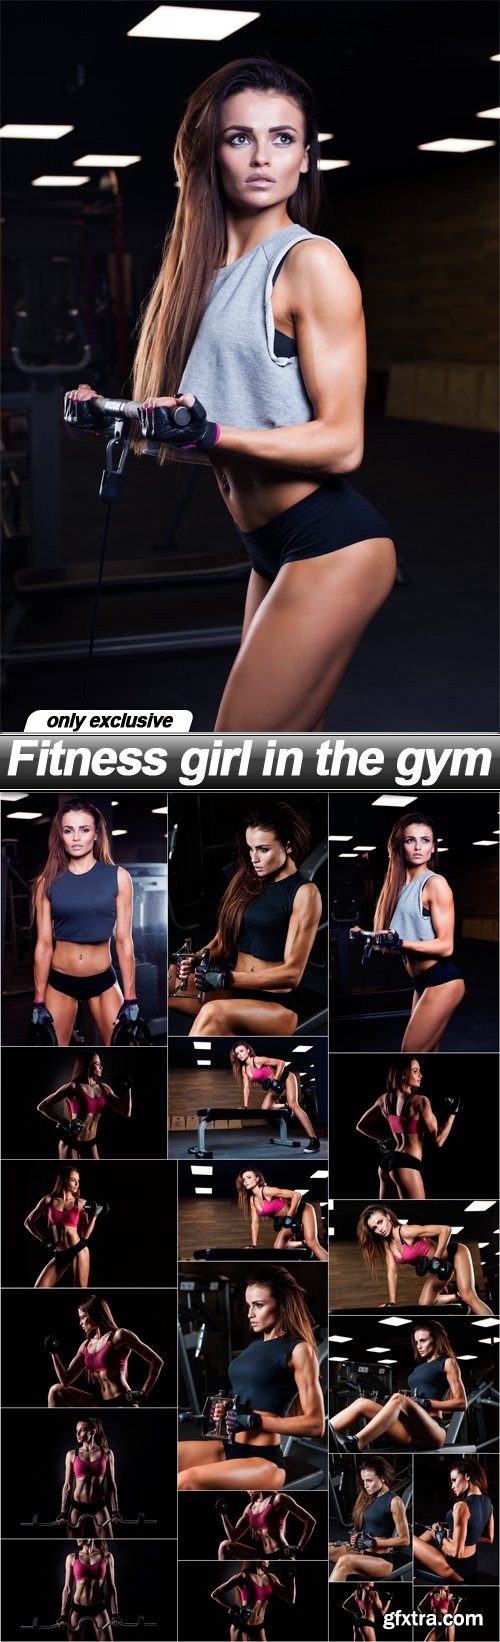 Fitness girl in the gym - 20 UHQ JPEG